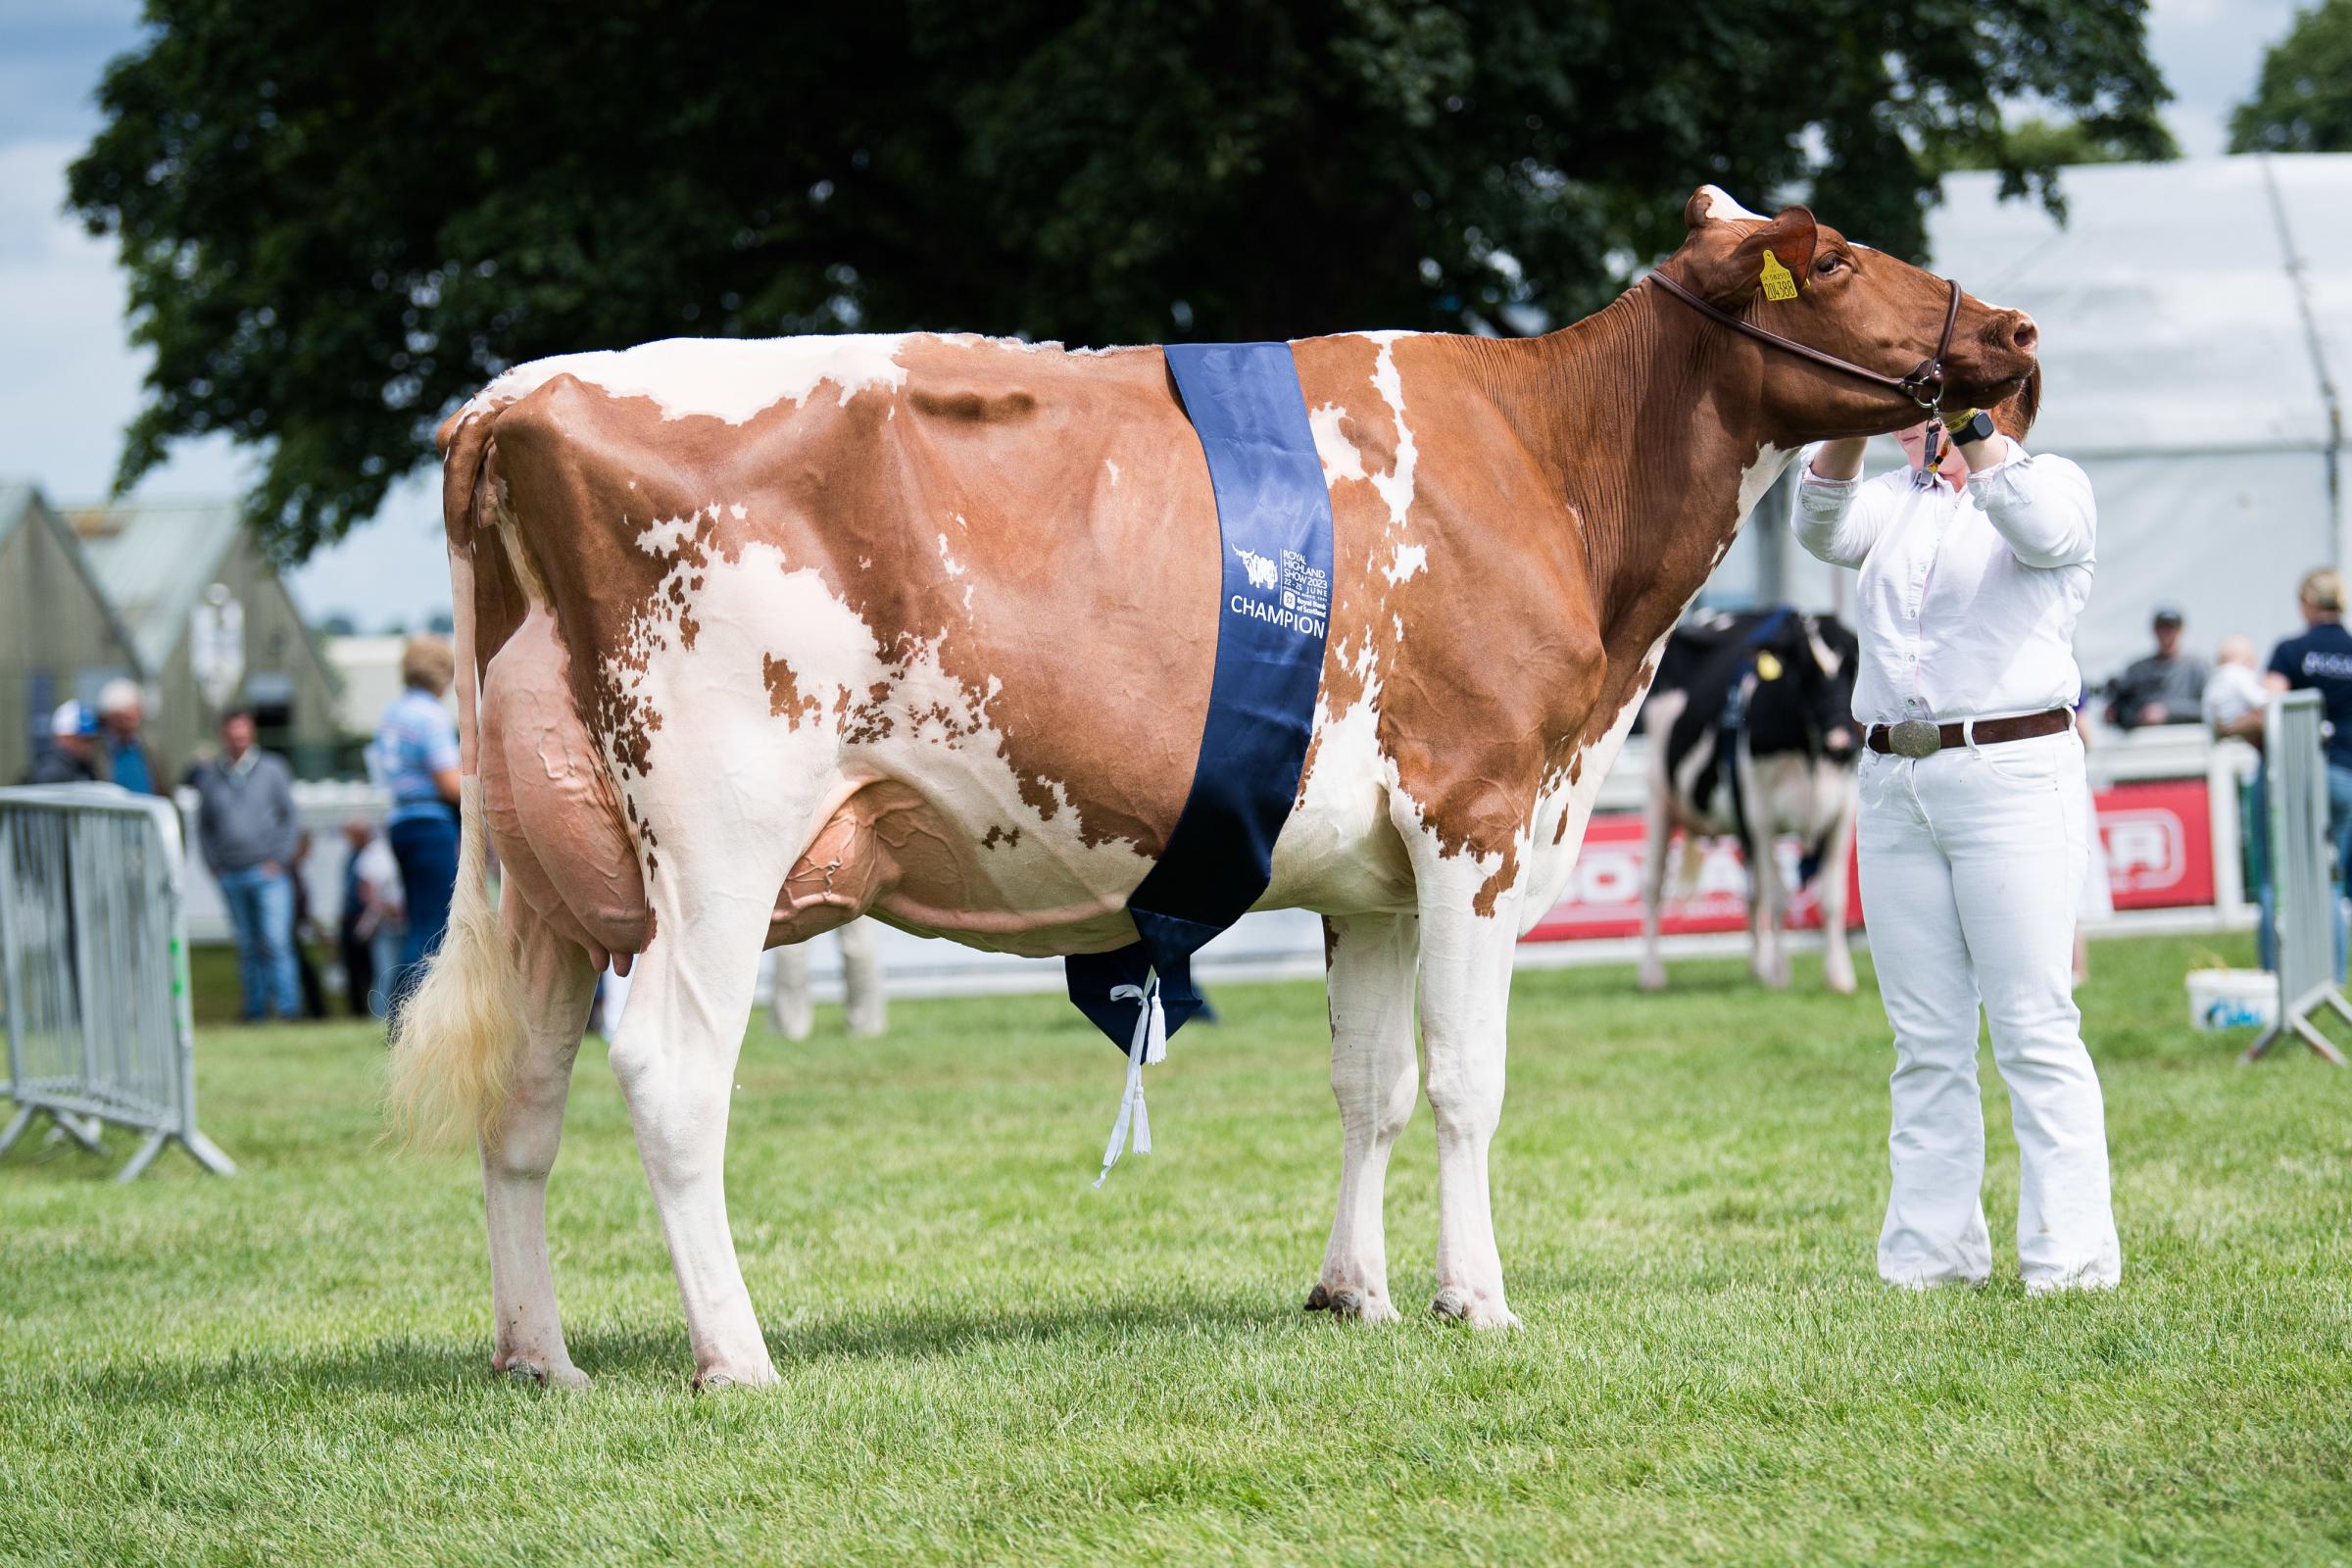 Winning the Red and White section was the cow from te Yates family Ref:RH230623104 Rob Haining / The Scottish Farmer...